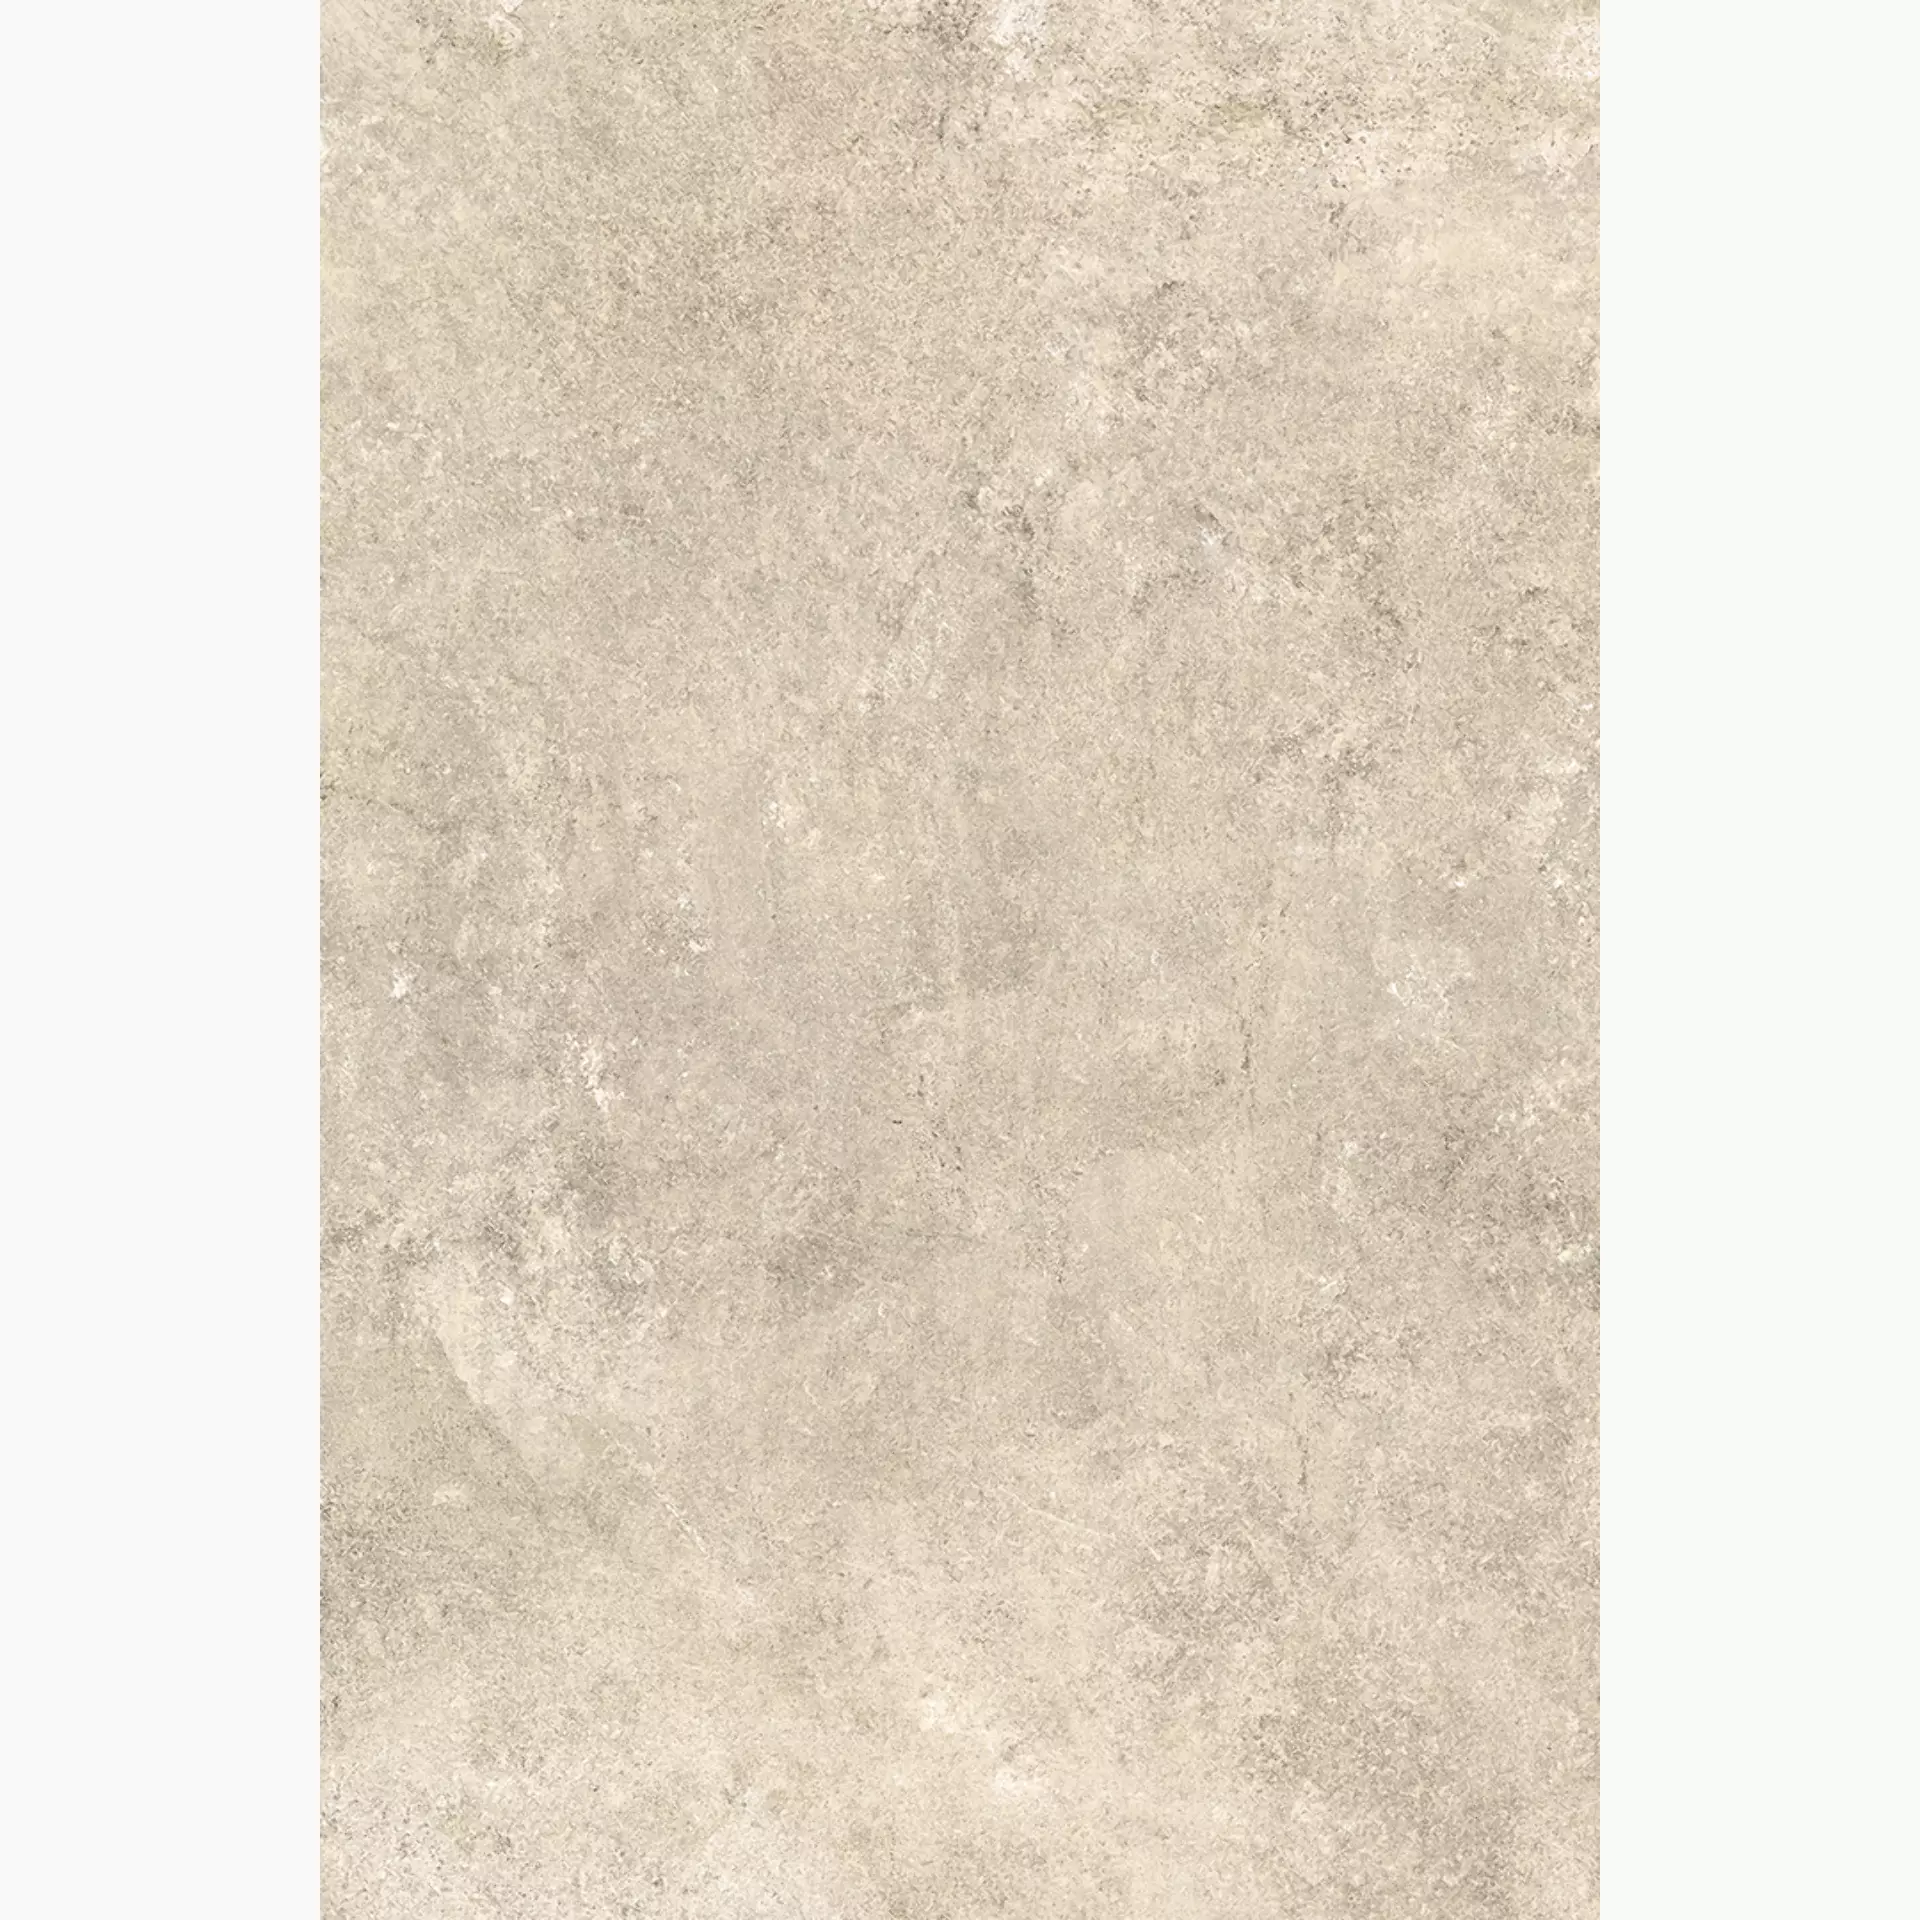 Fondovalle Reframe Ivory Natural REF095 40x80cm rectified 8,5mm